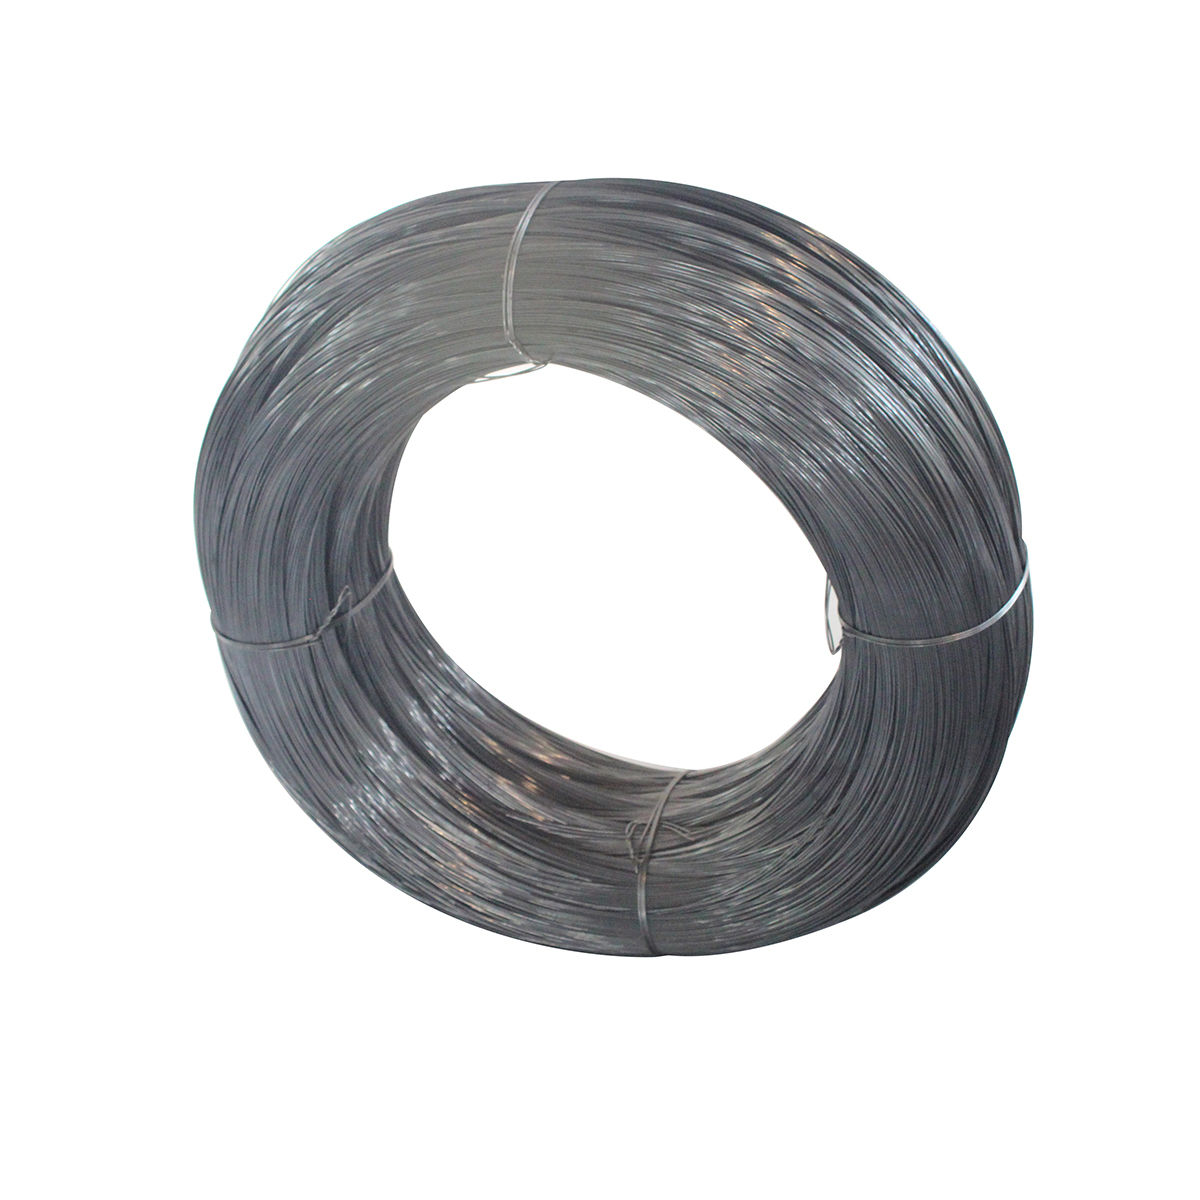 82A High carbon steel wire